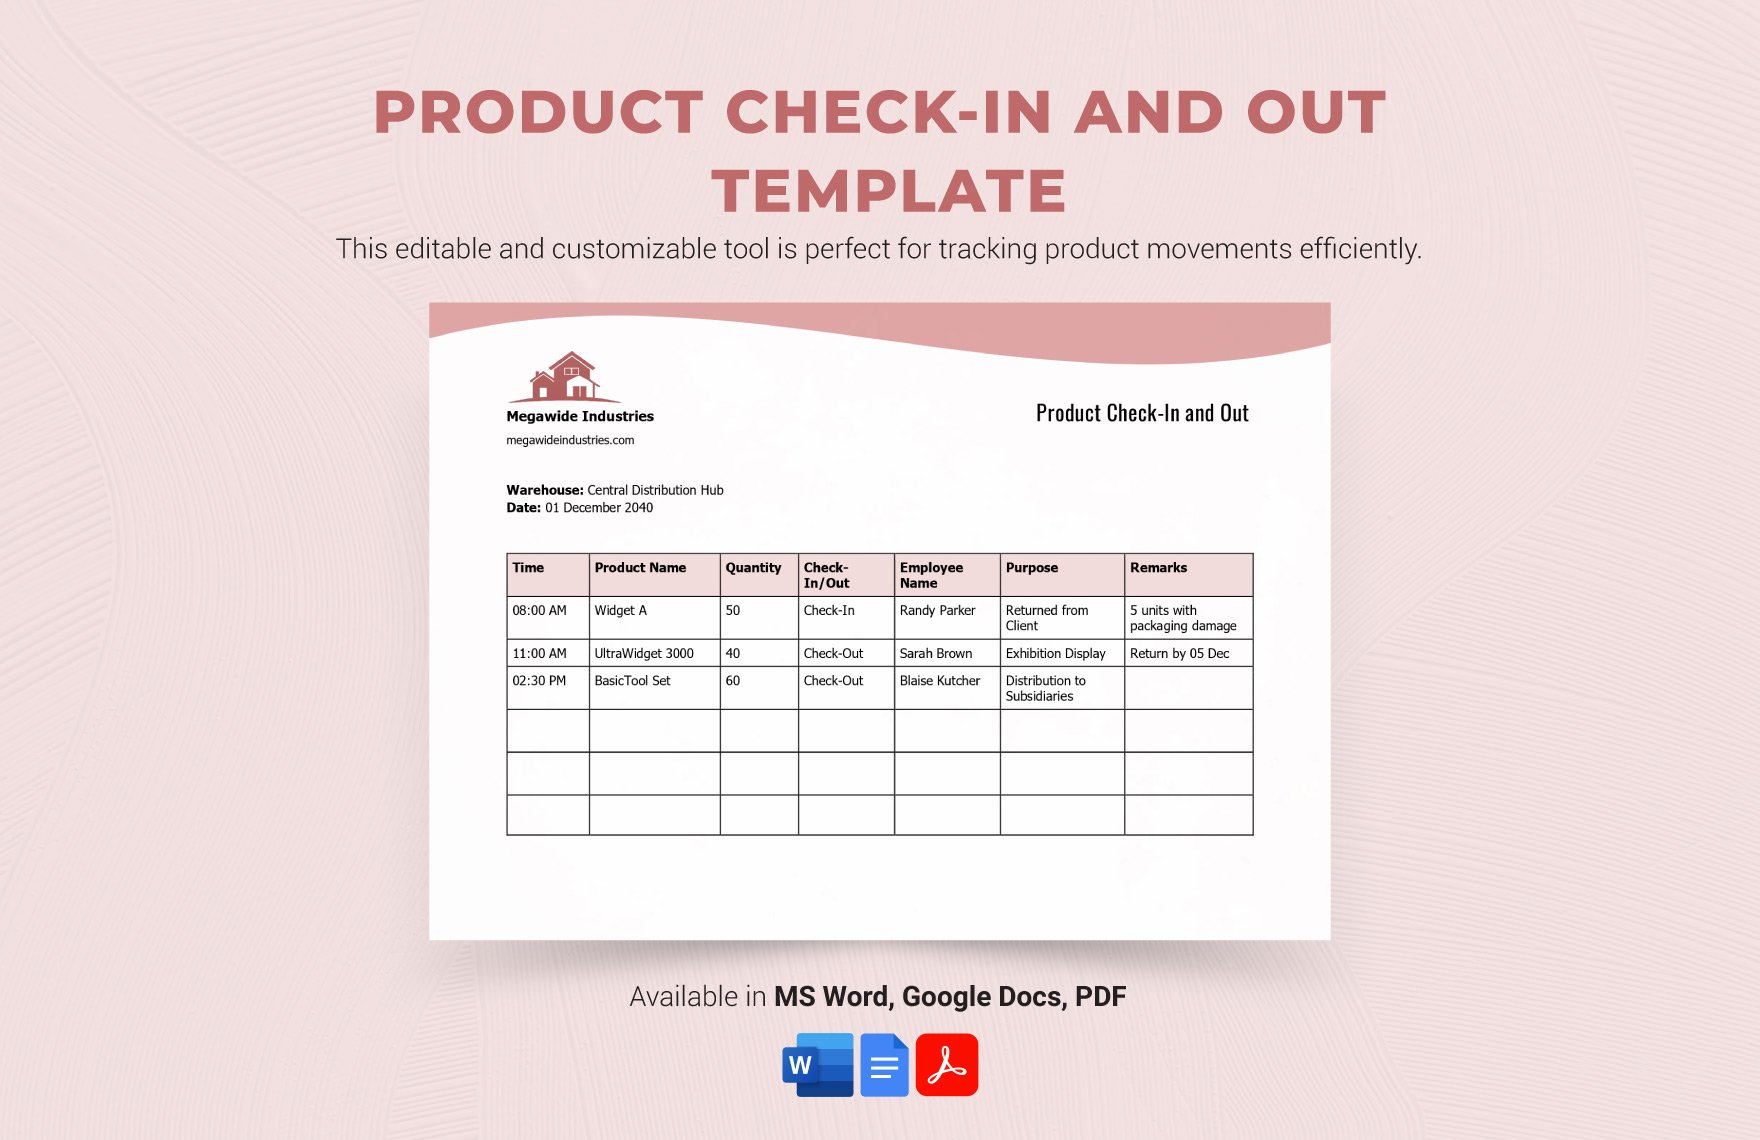 Product Check-in and Out Template